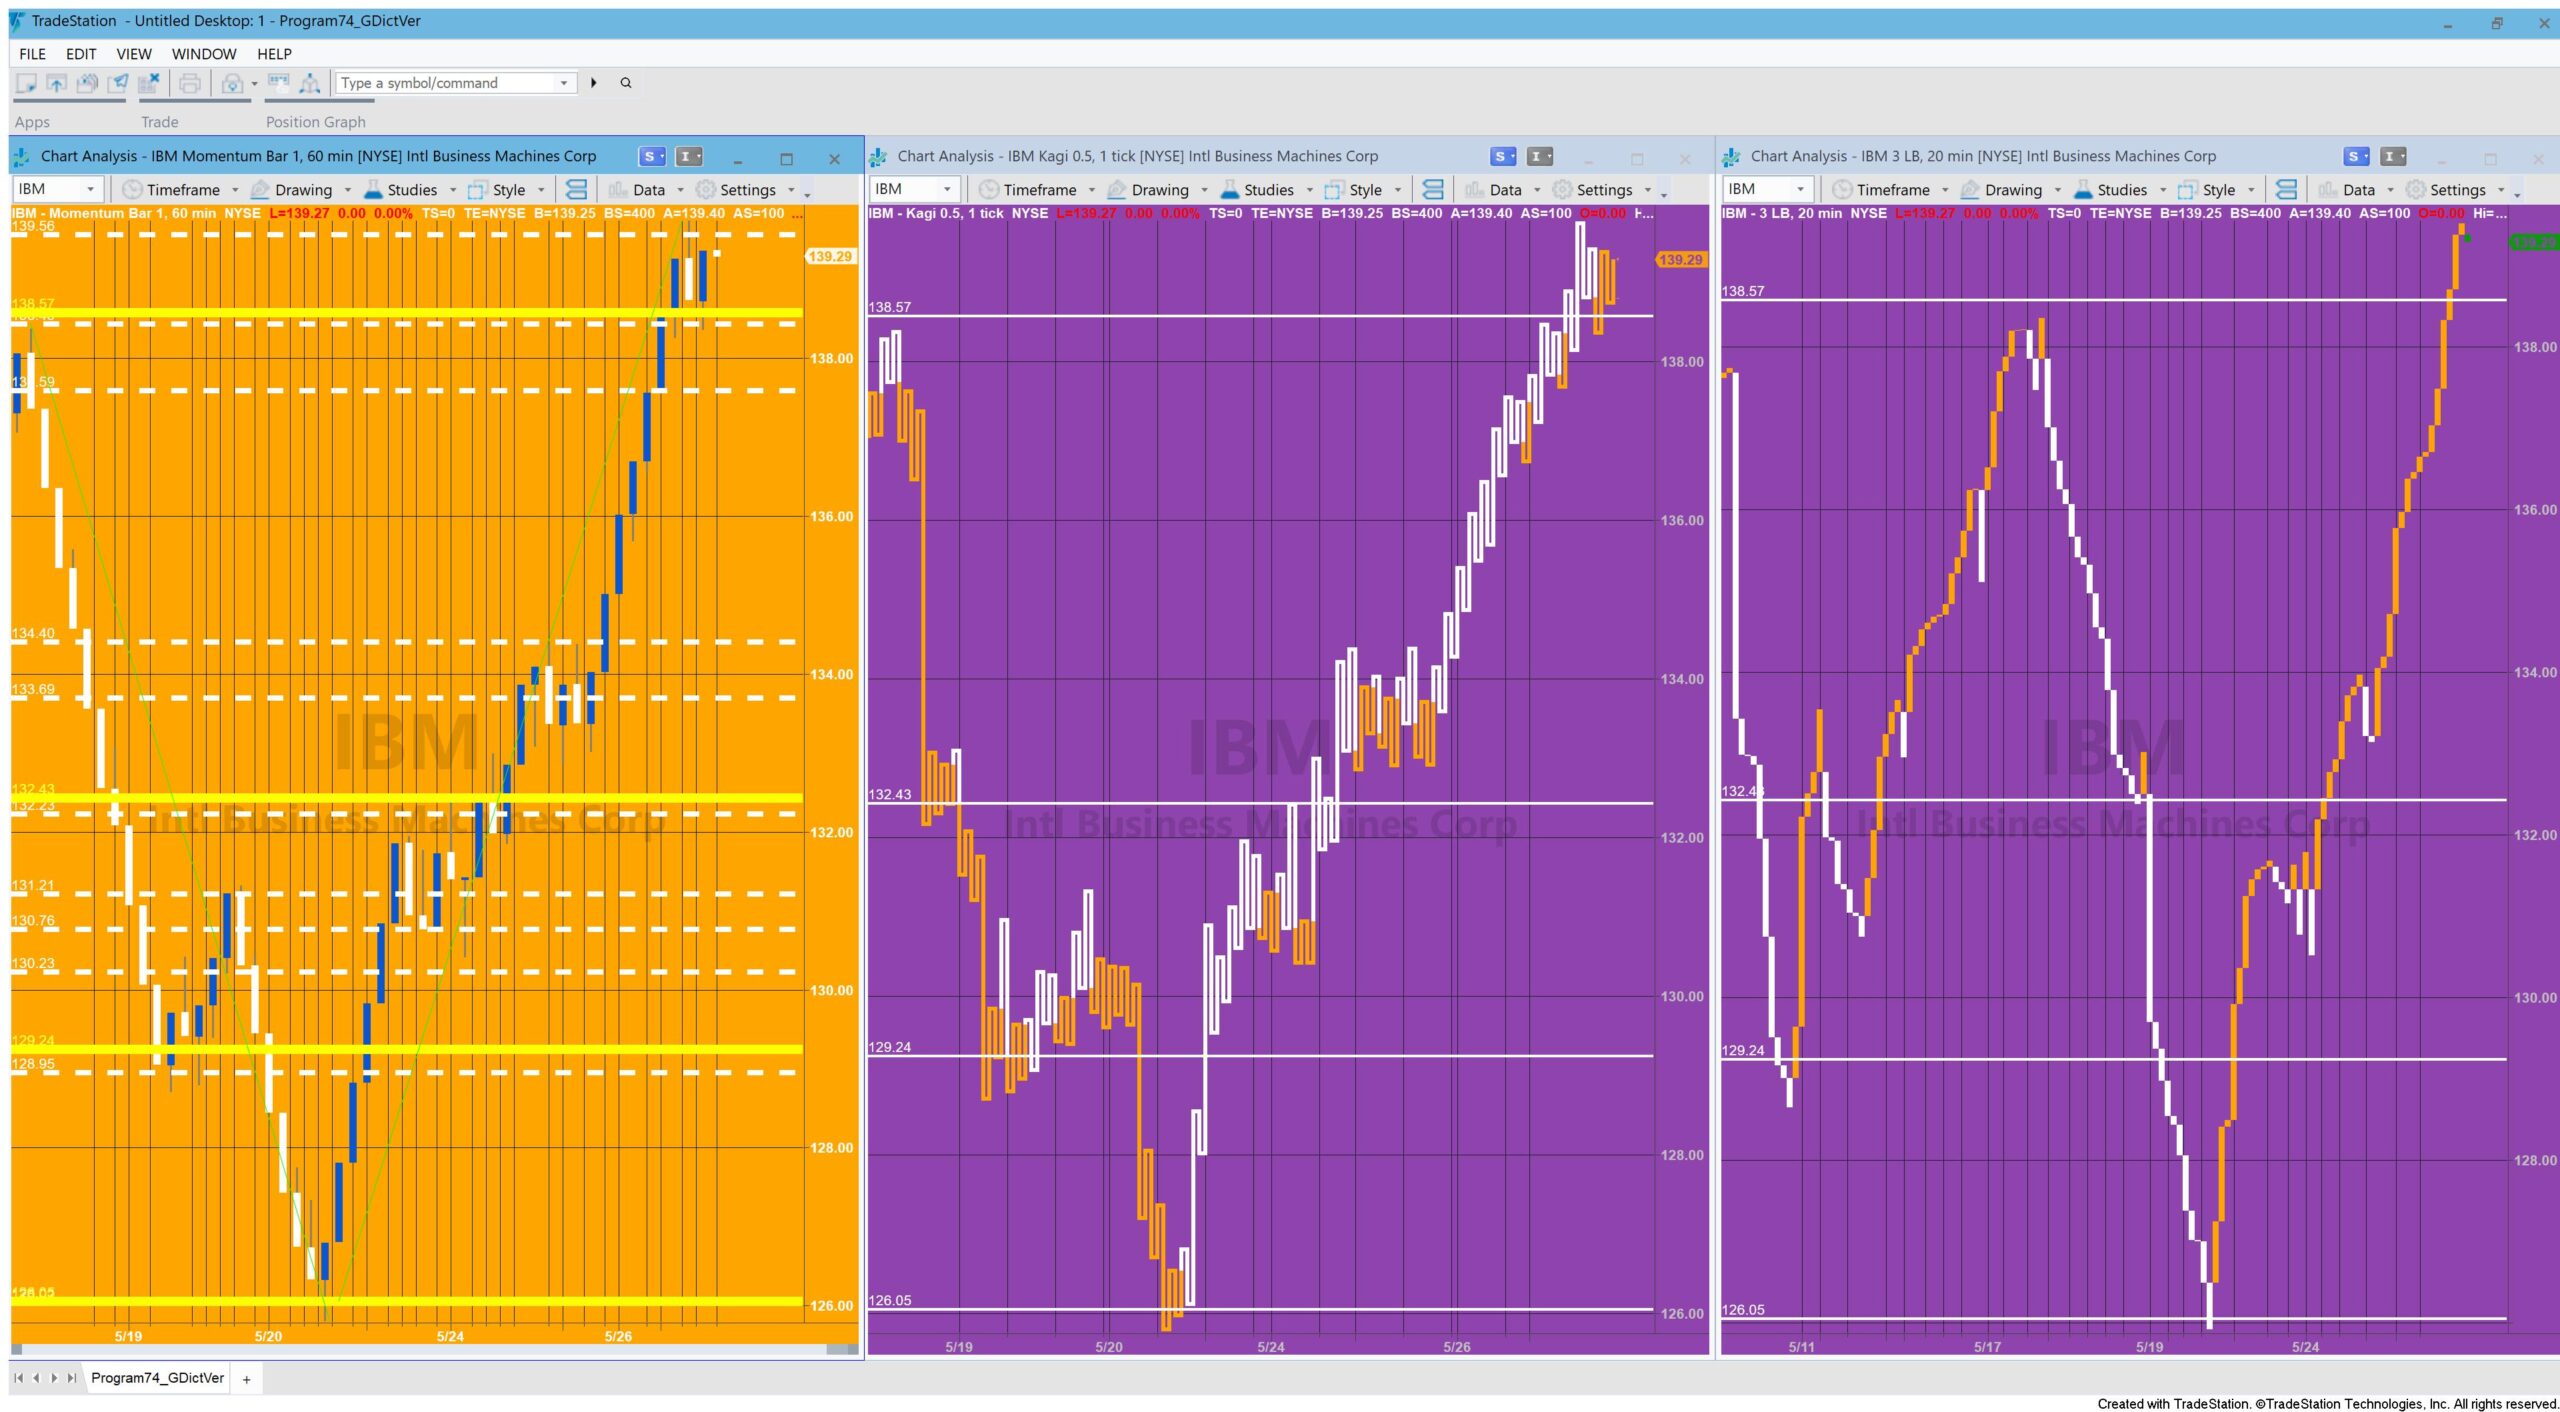 Program 74 with a momentum bars sending chart and Kagi and Line Break receiving charts